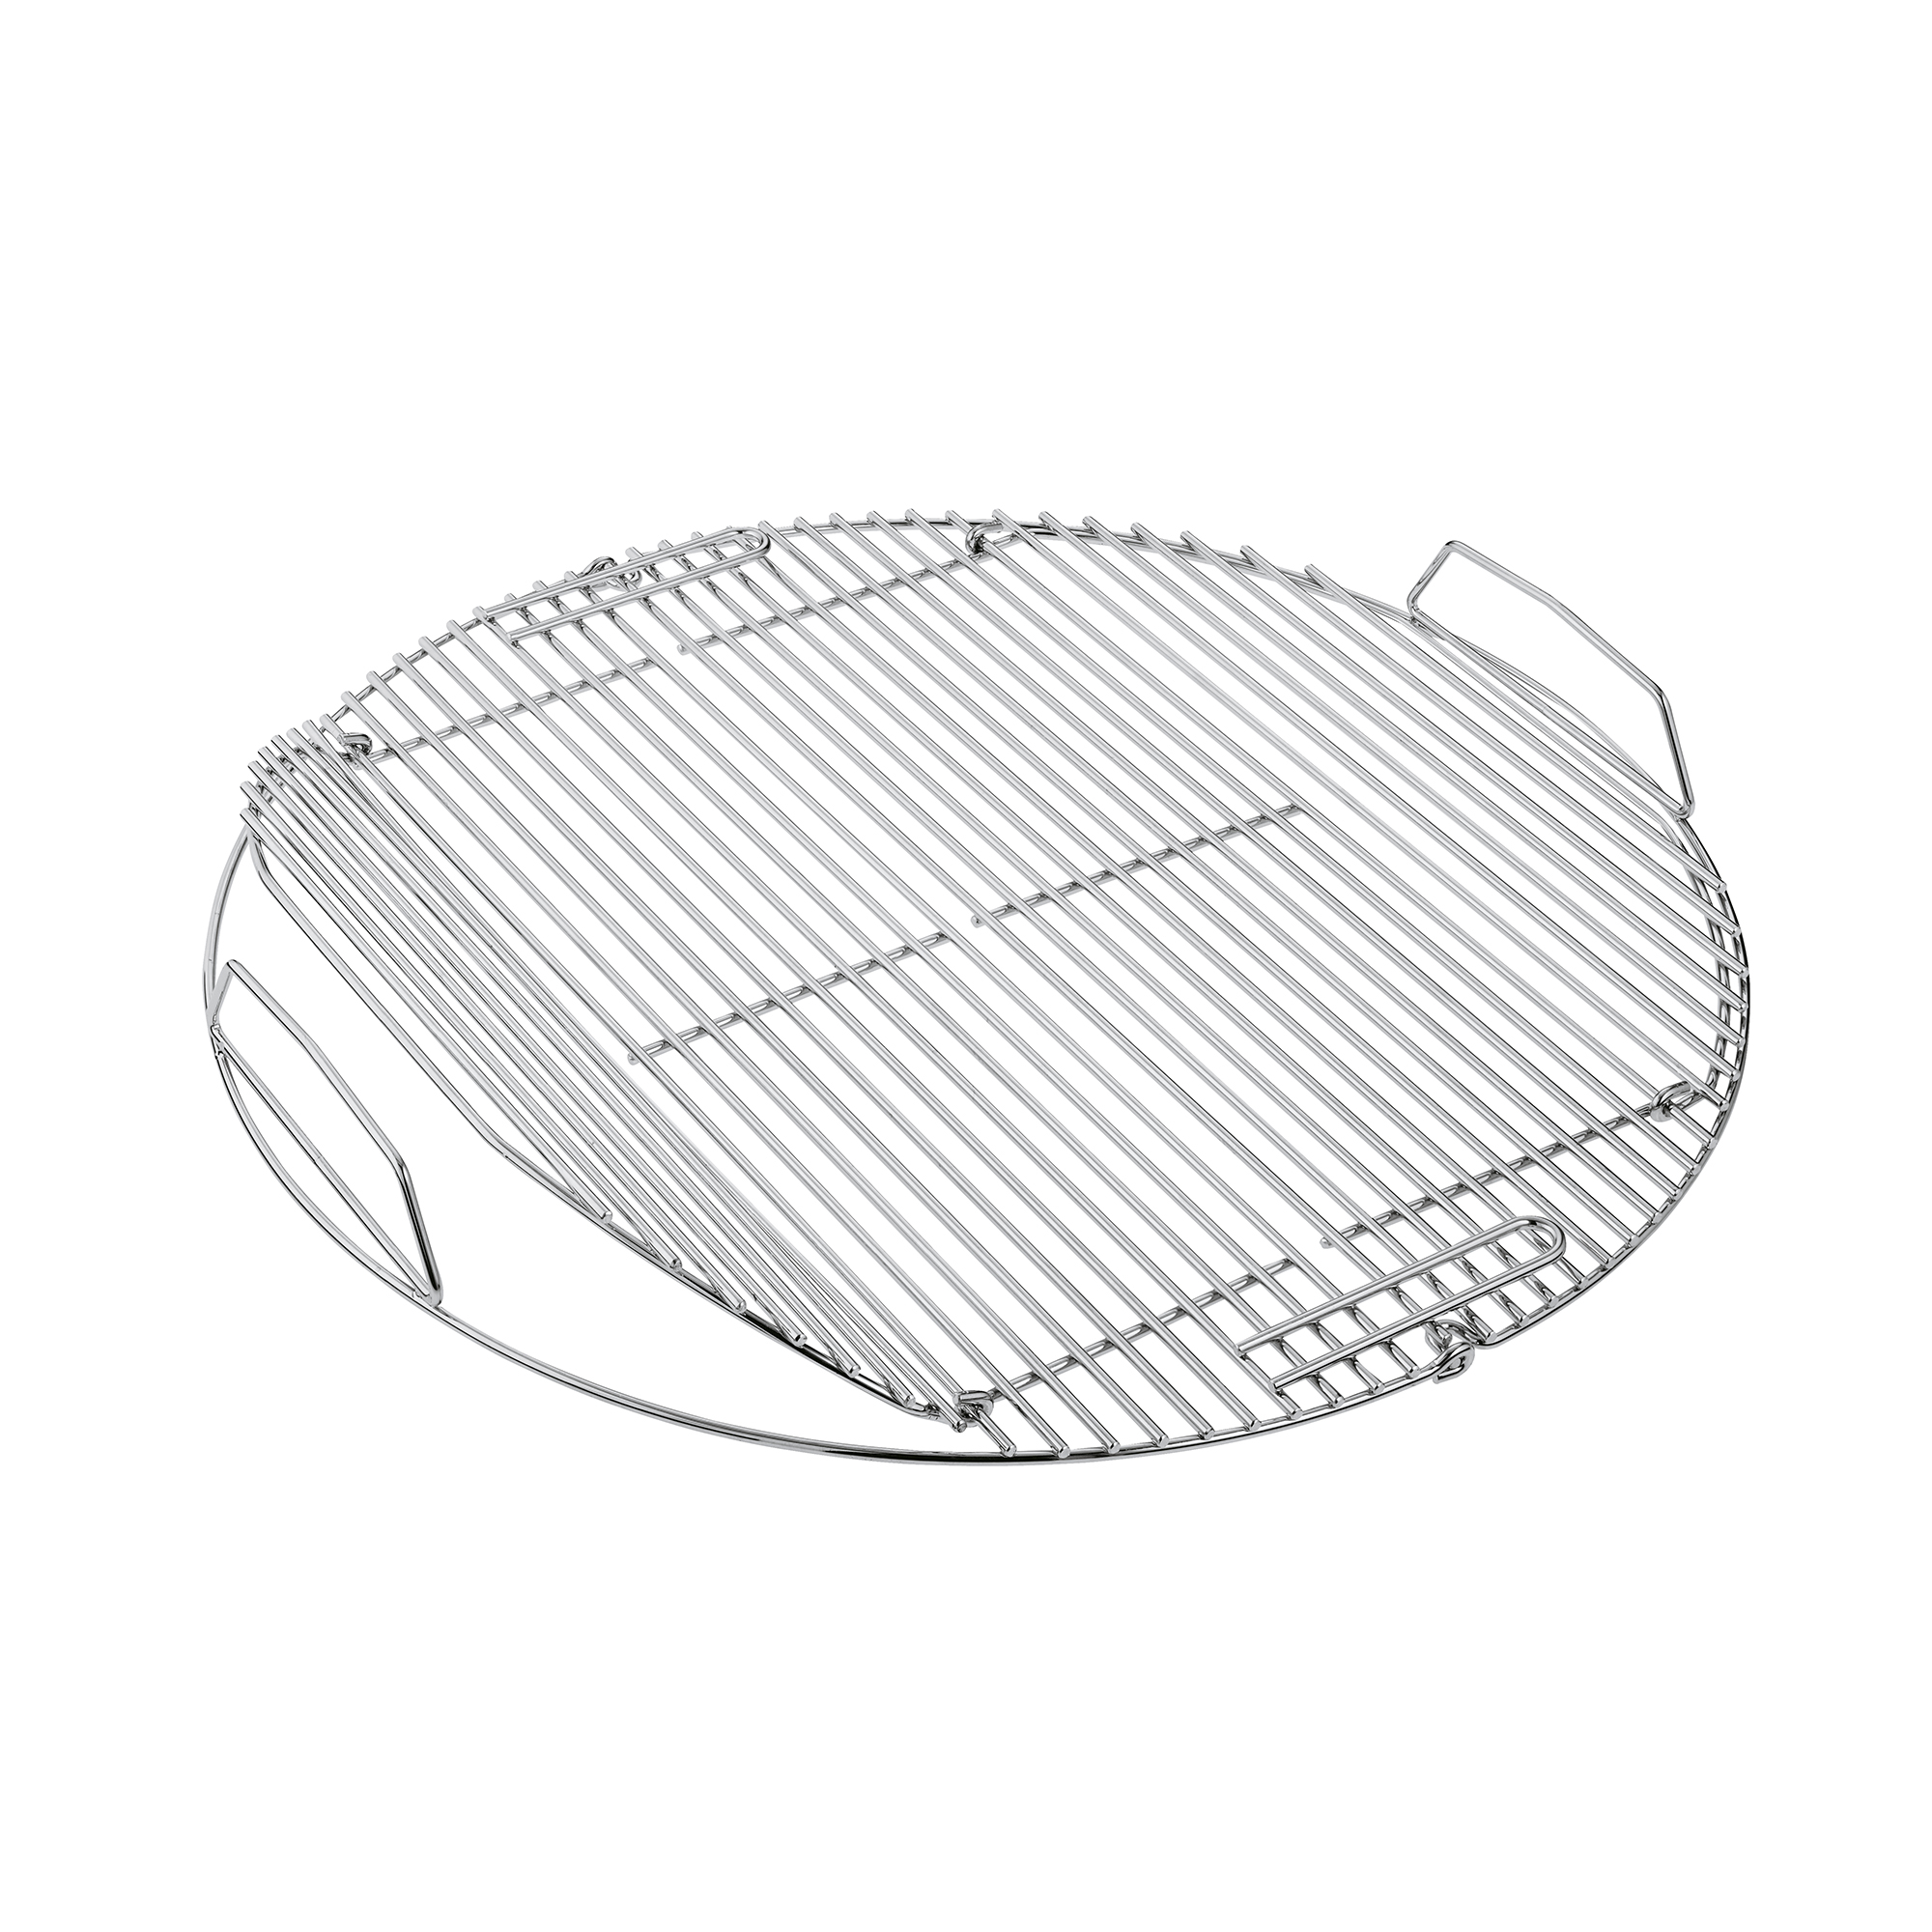 Grilling Grate No 1 F50/AIR F50 stainless steel 20 in.